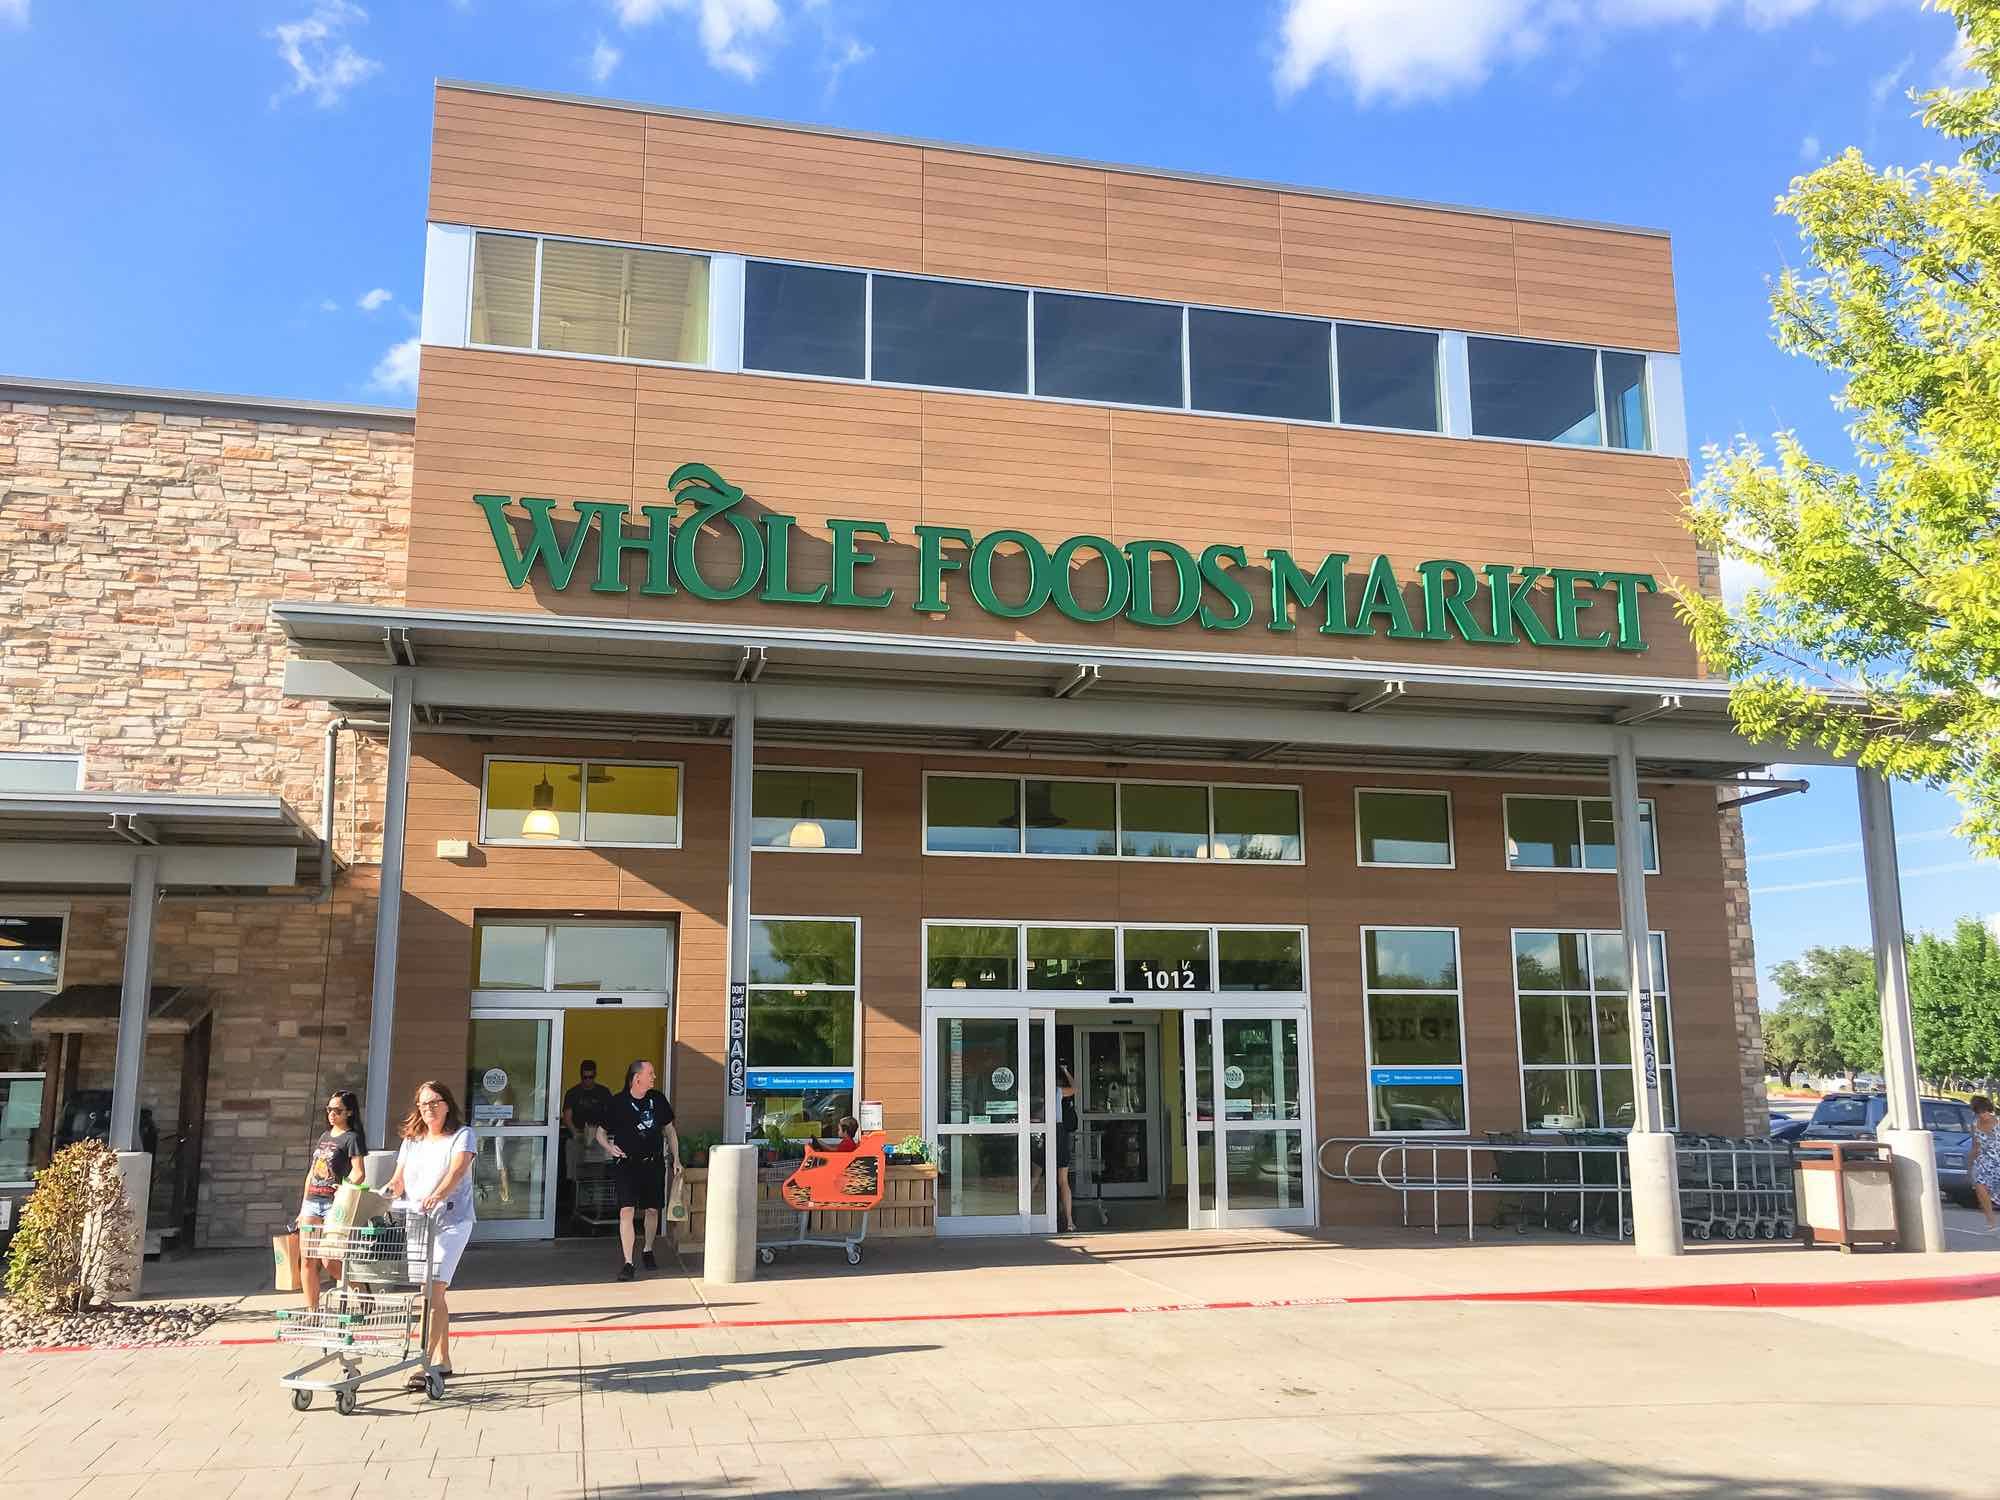 Black Lives Matter protesting at Whole Foods